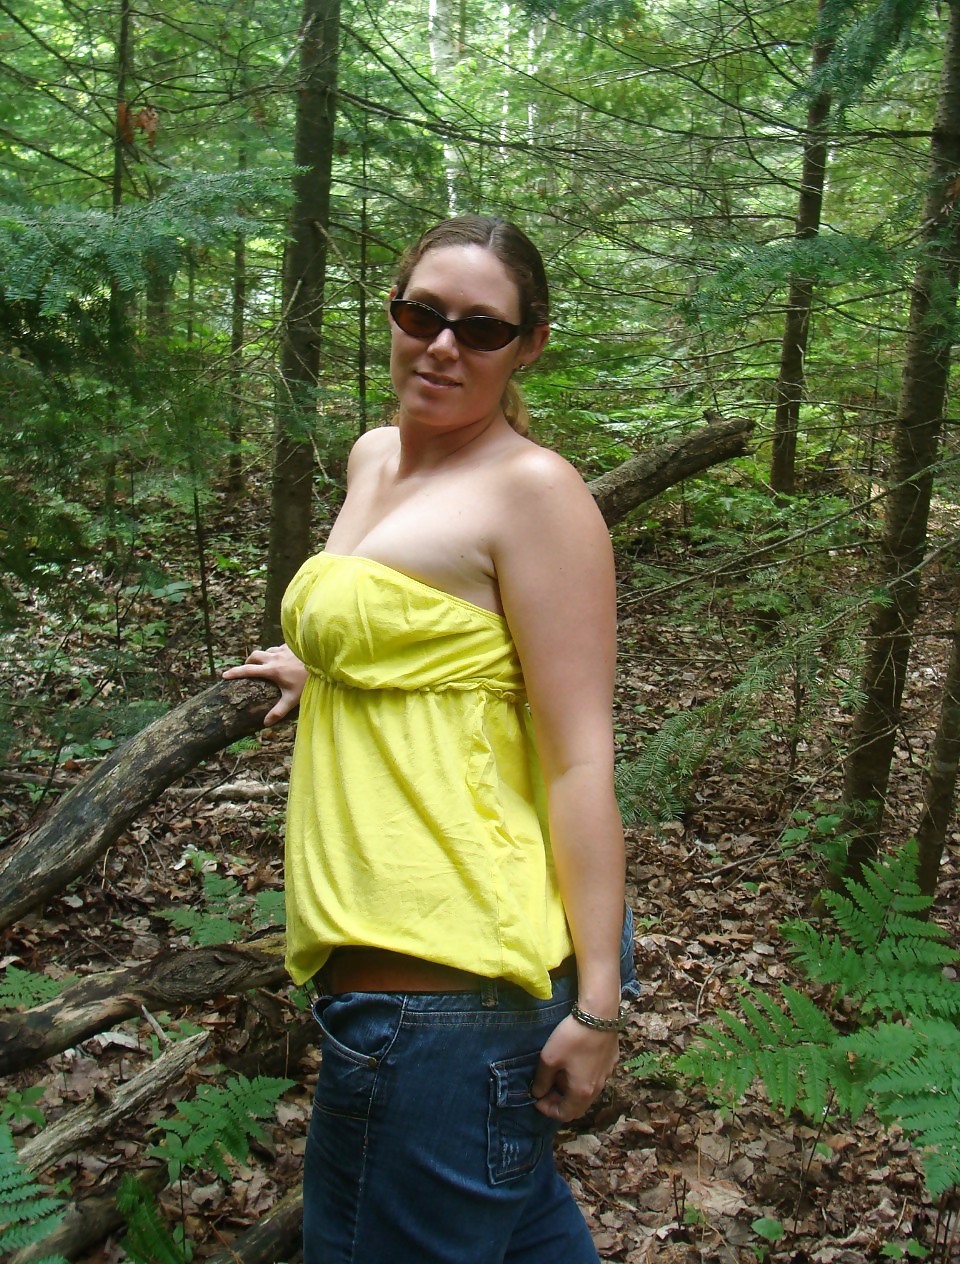 Free Chubby Milf in the forest photos